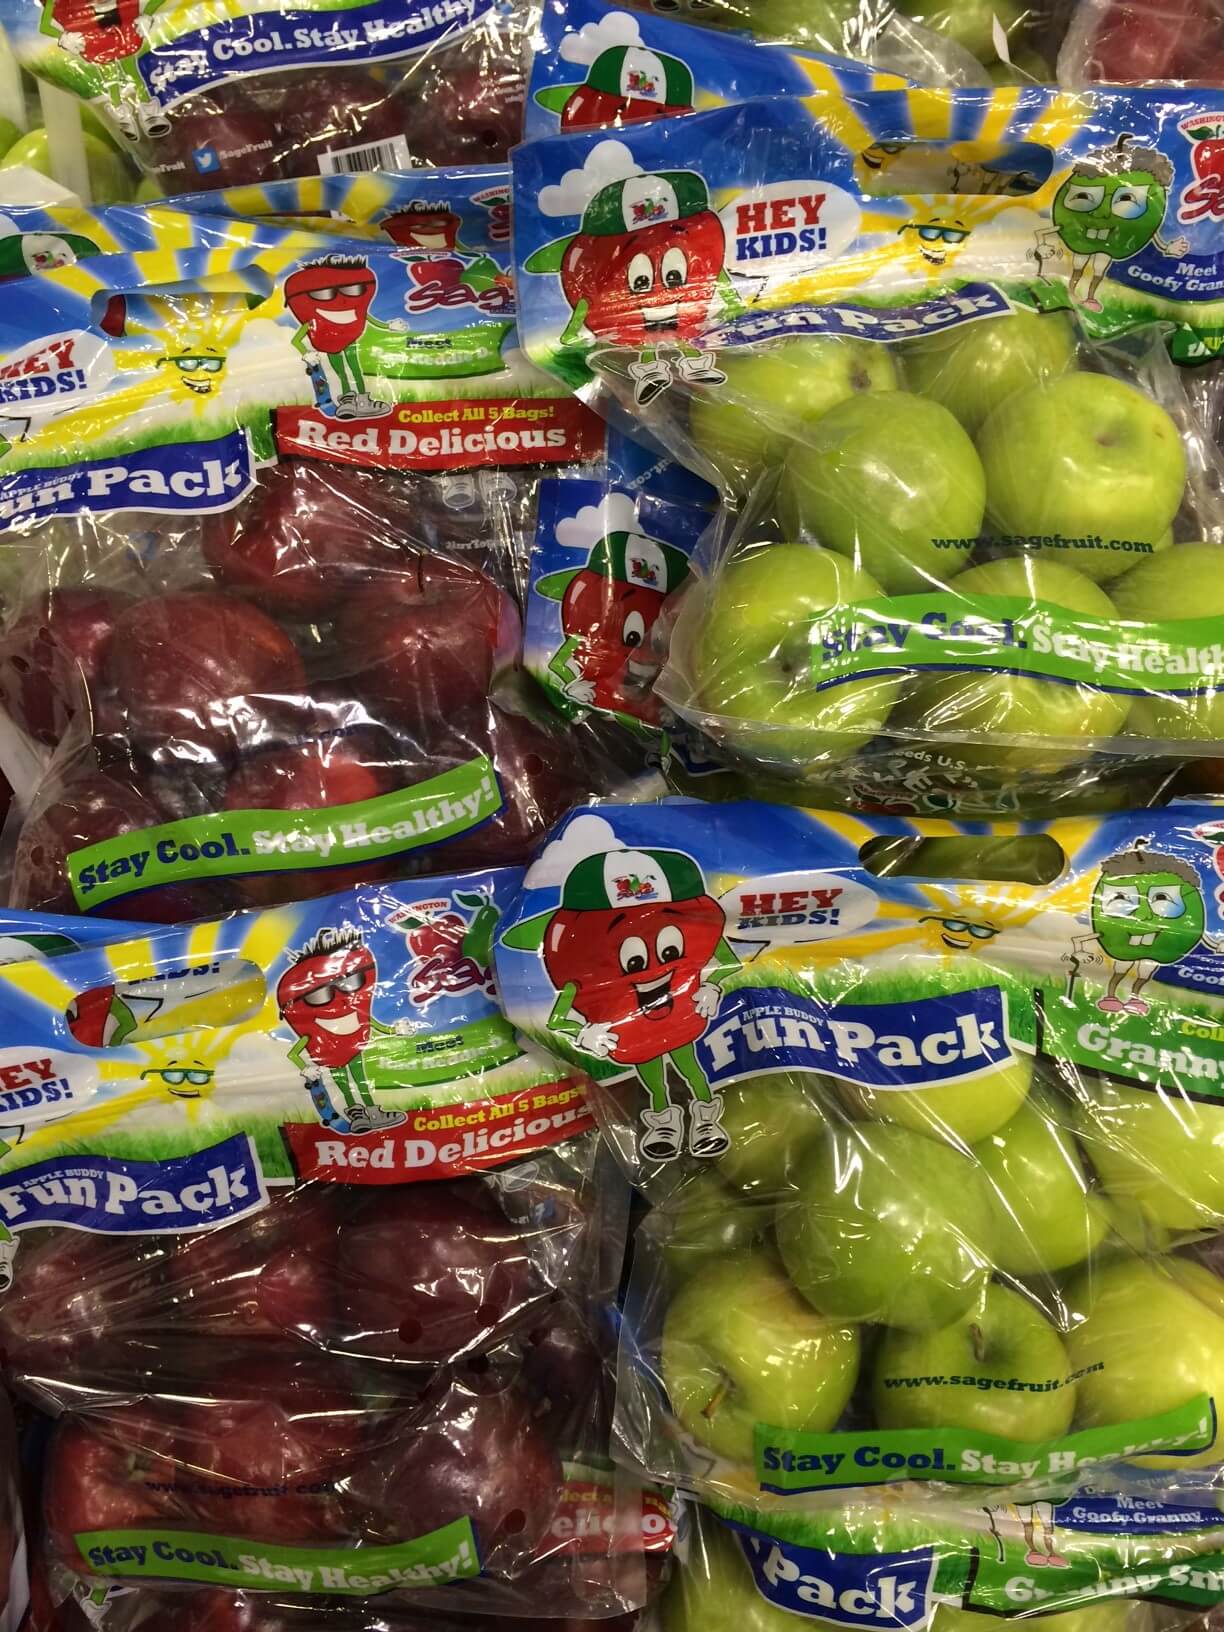 Ask the Produce Expert: Kid-Friendly Marketing